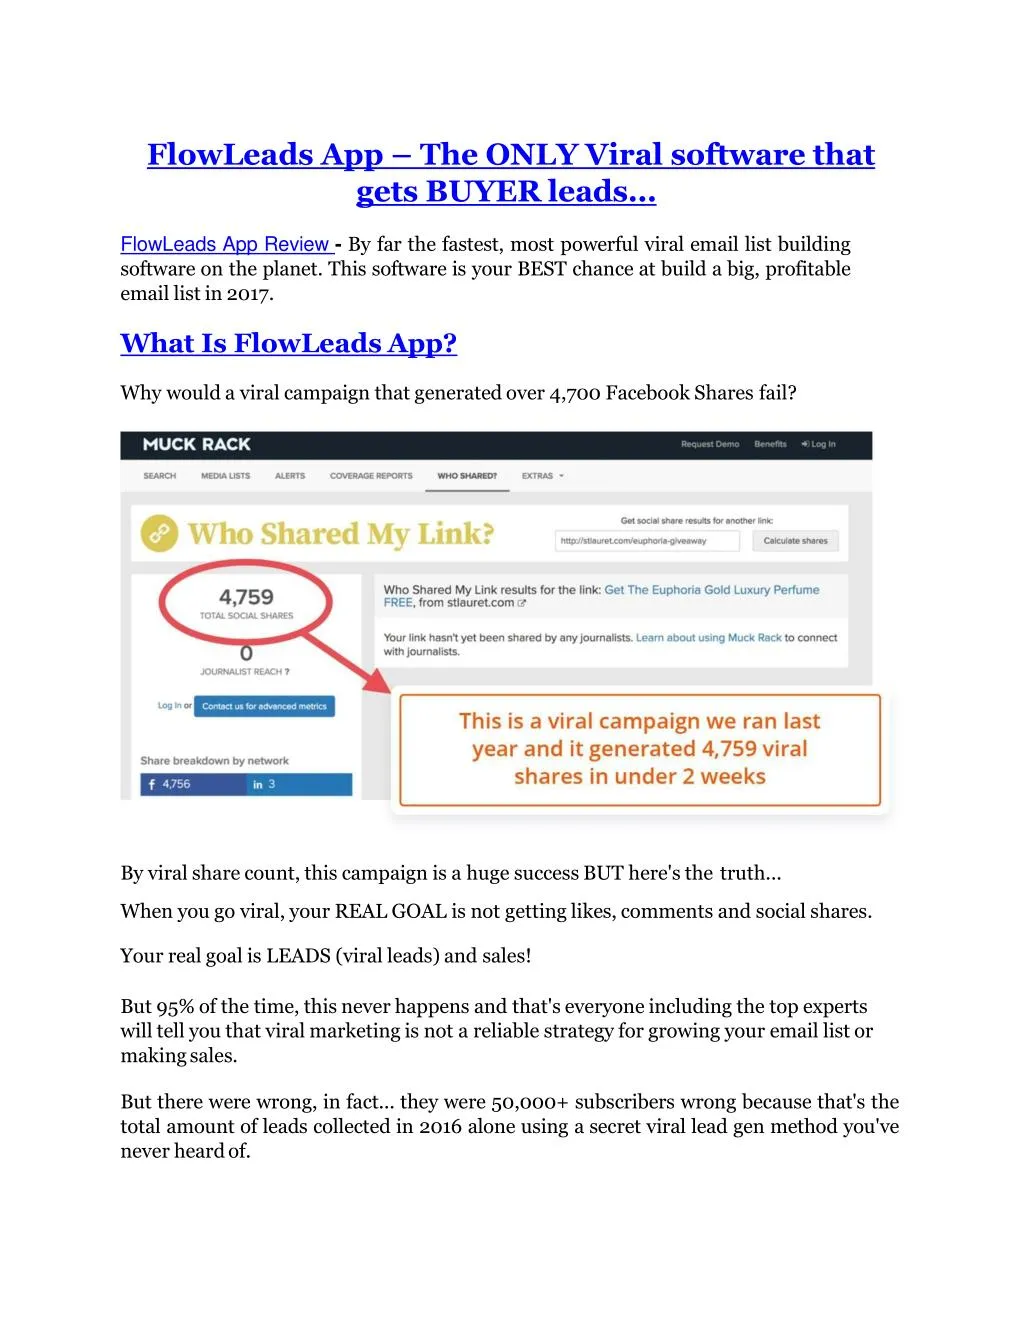 flowleads app the only viral software that gets